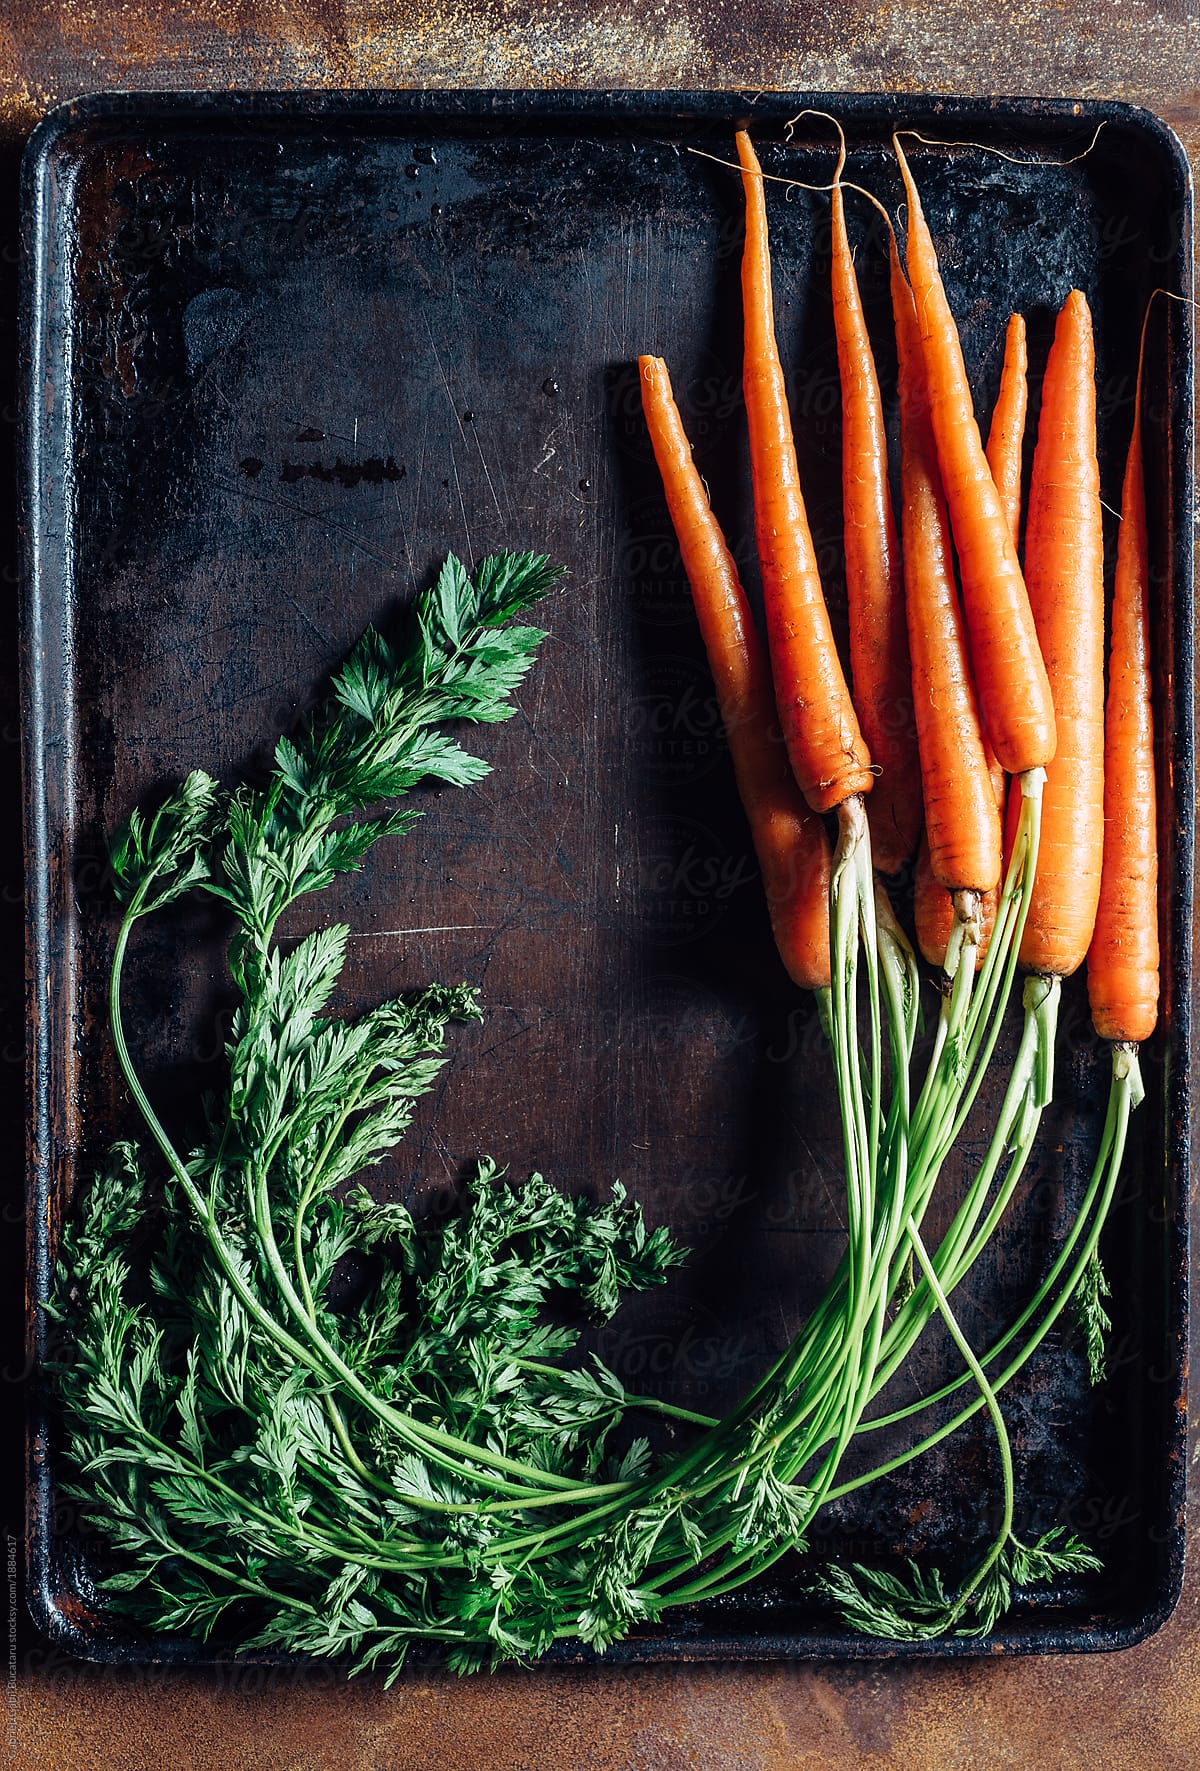 Bundle of fresh carrots in a tray